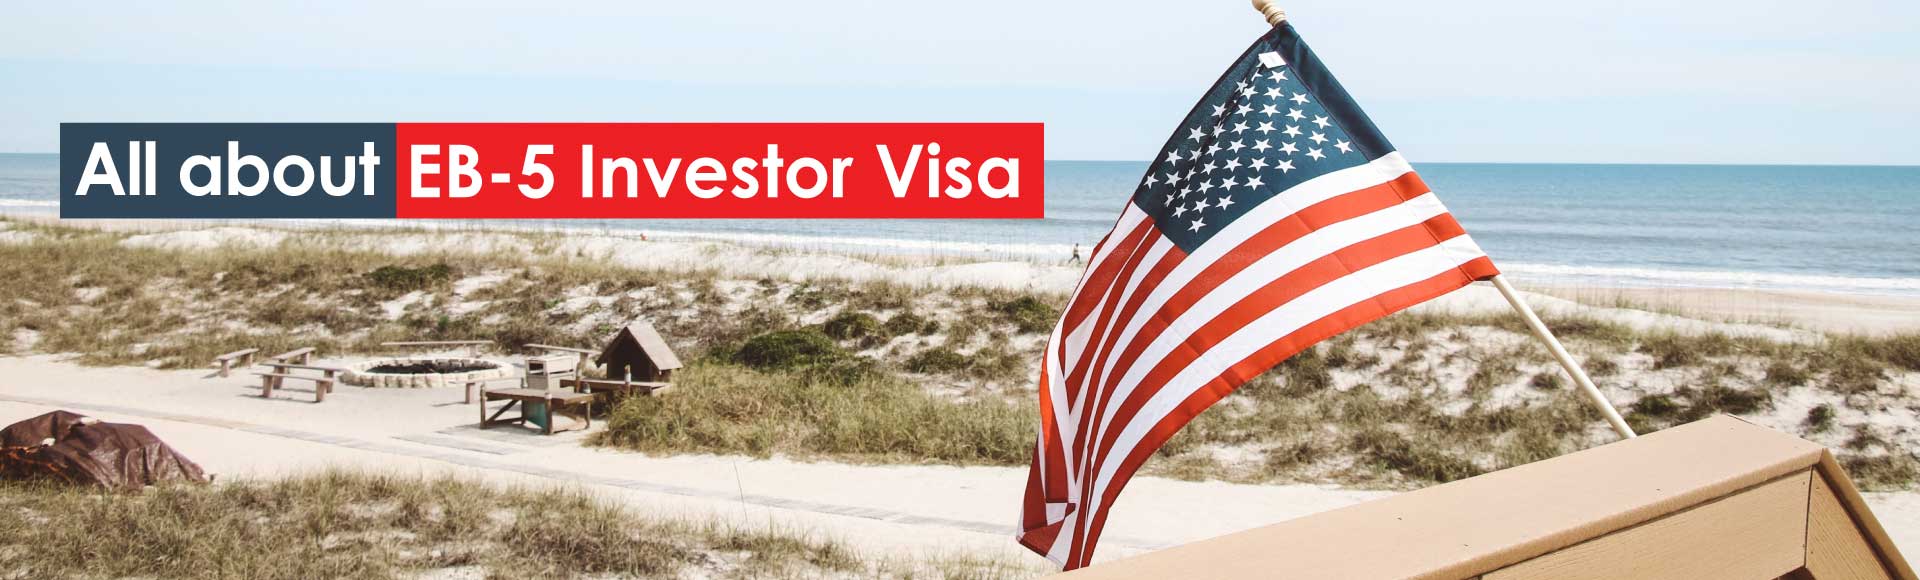 All about EB-5 Investor Visa